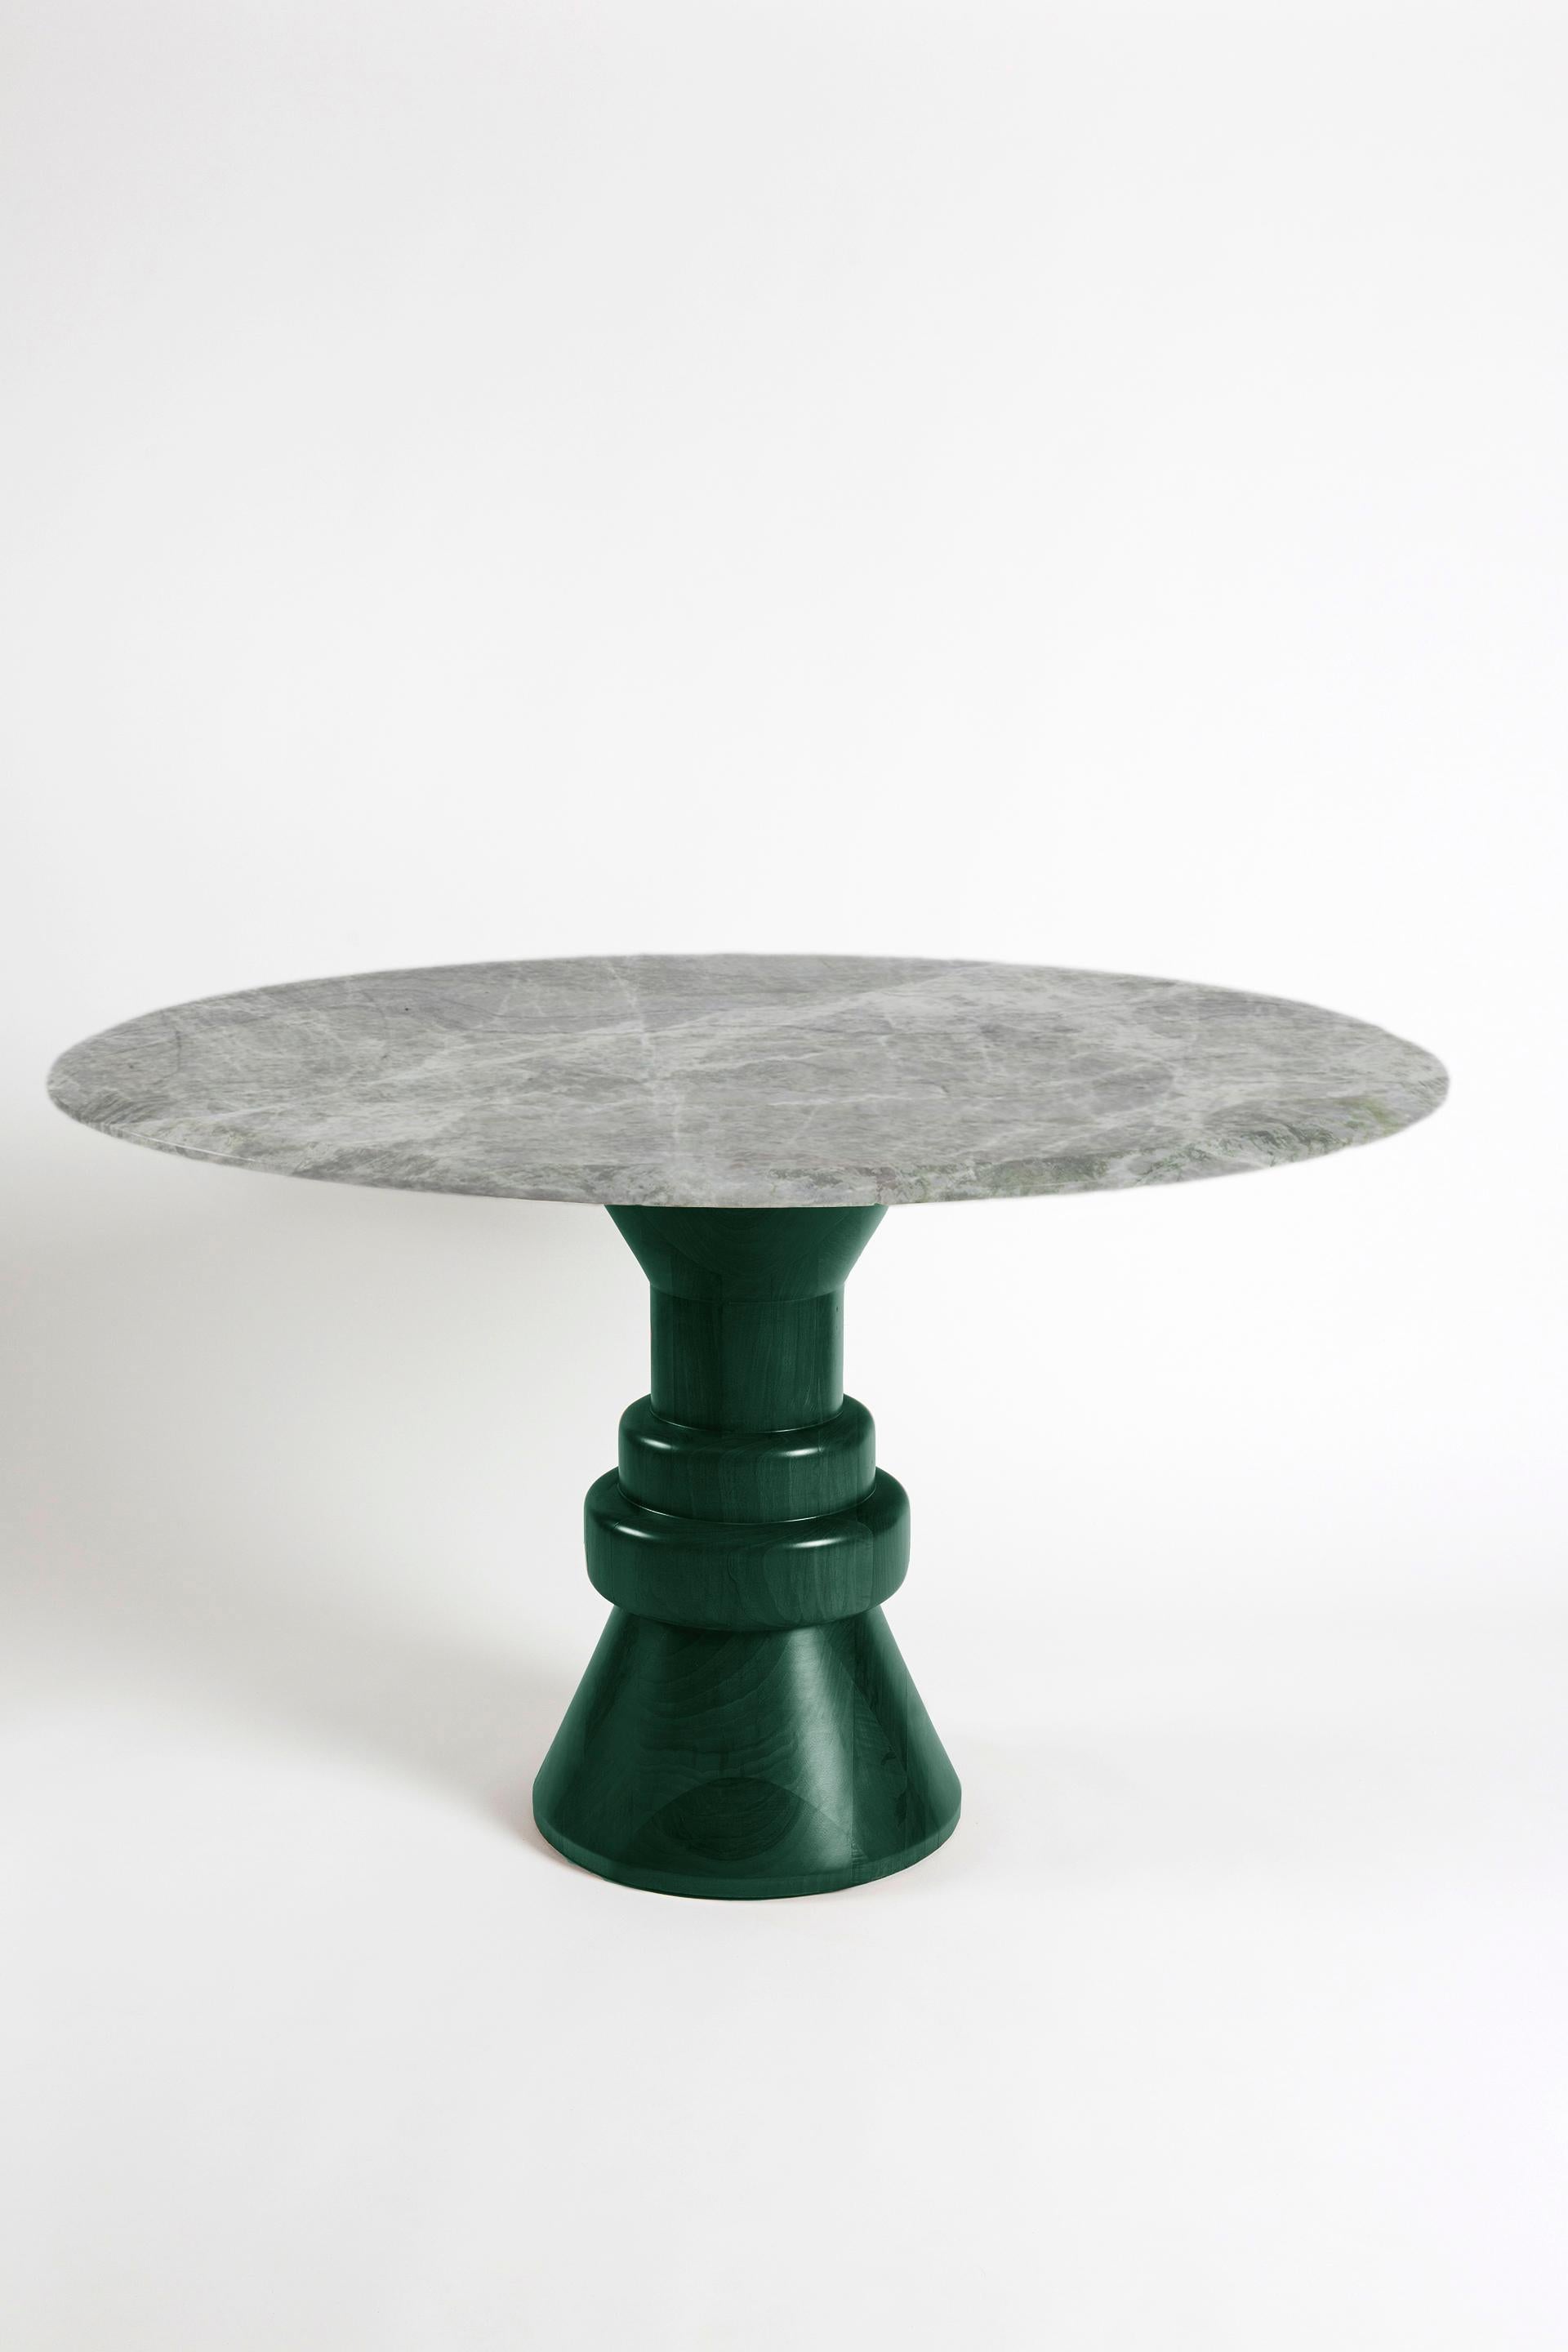 21st Century Red Marble Round Dining Table with Sculptural Black Wooden Base For Sale 1